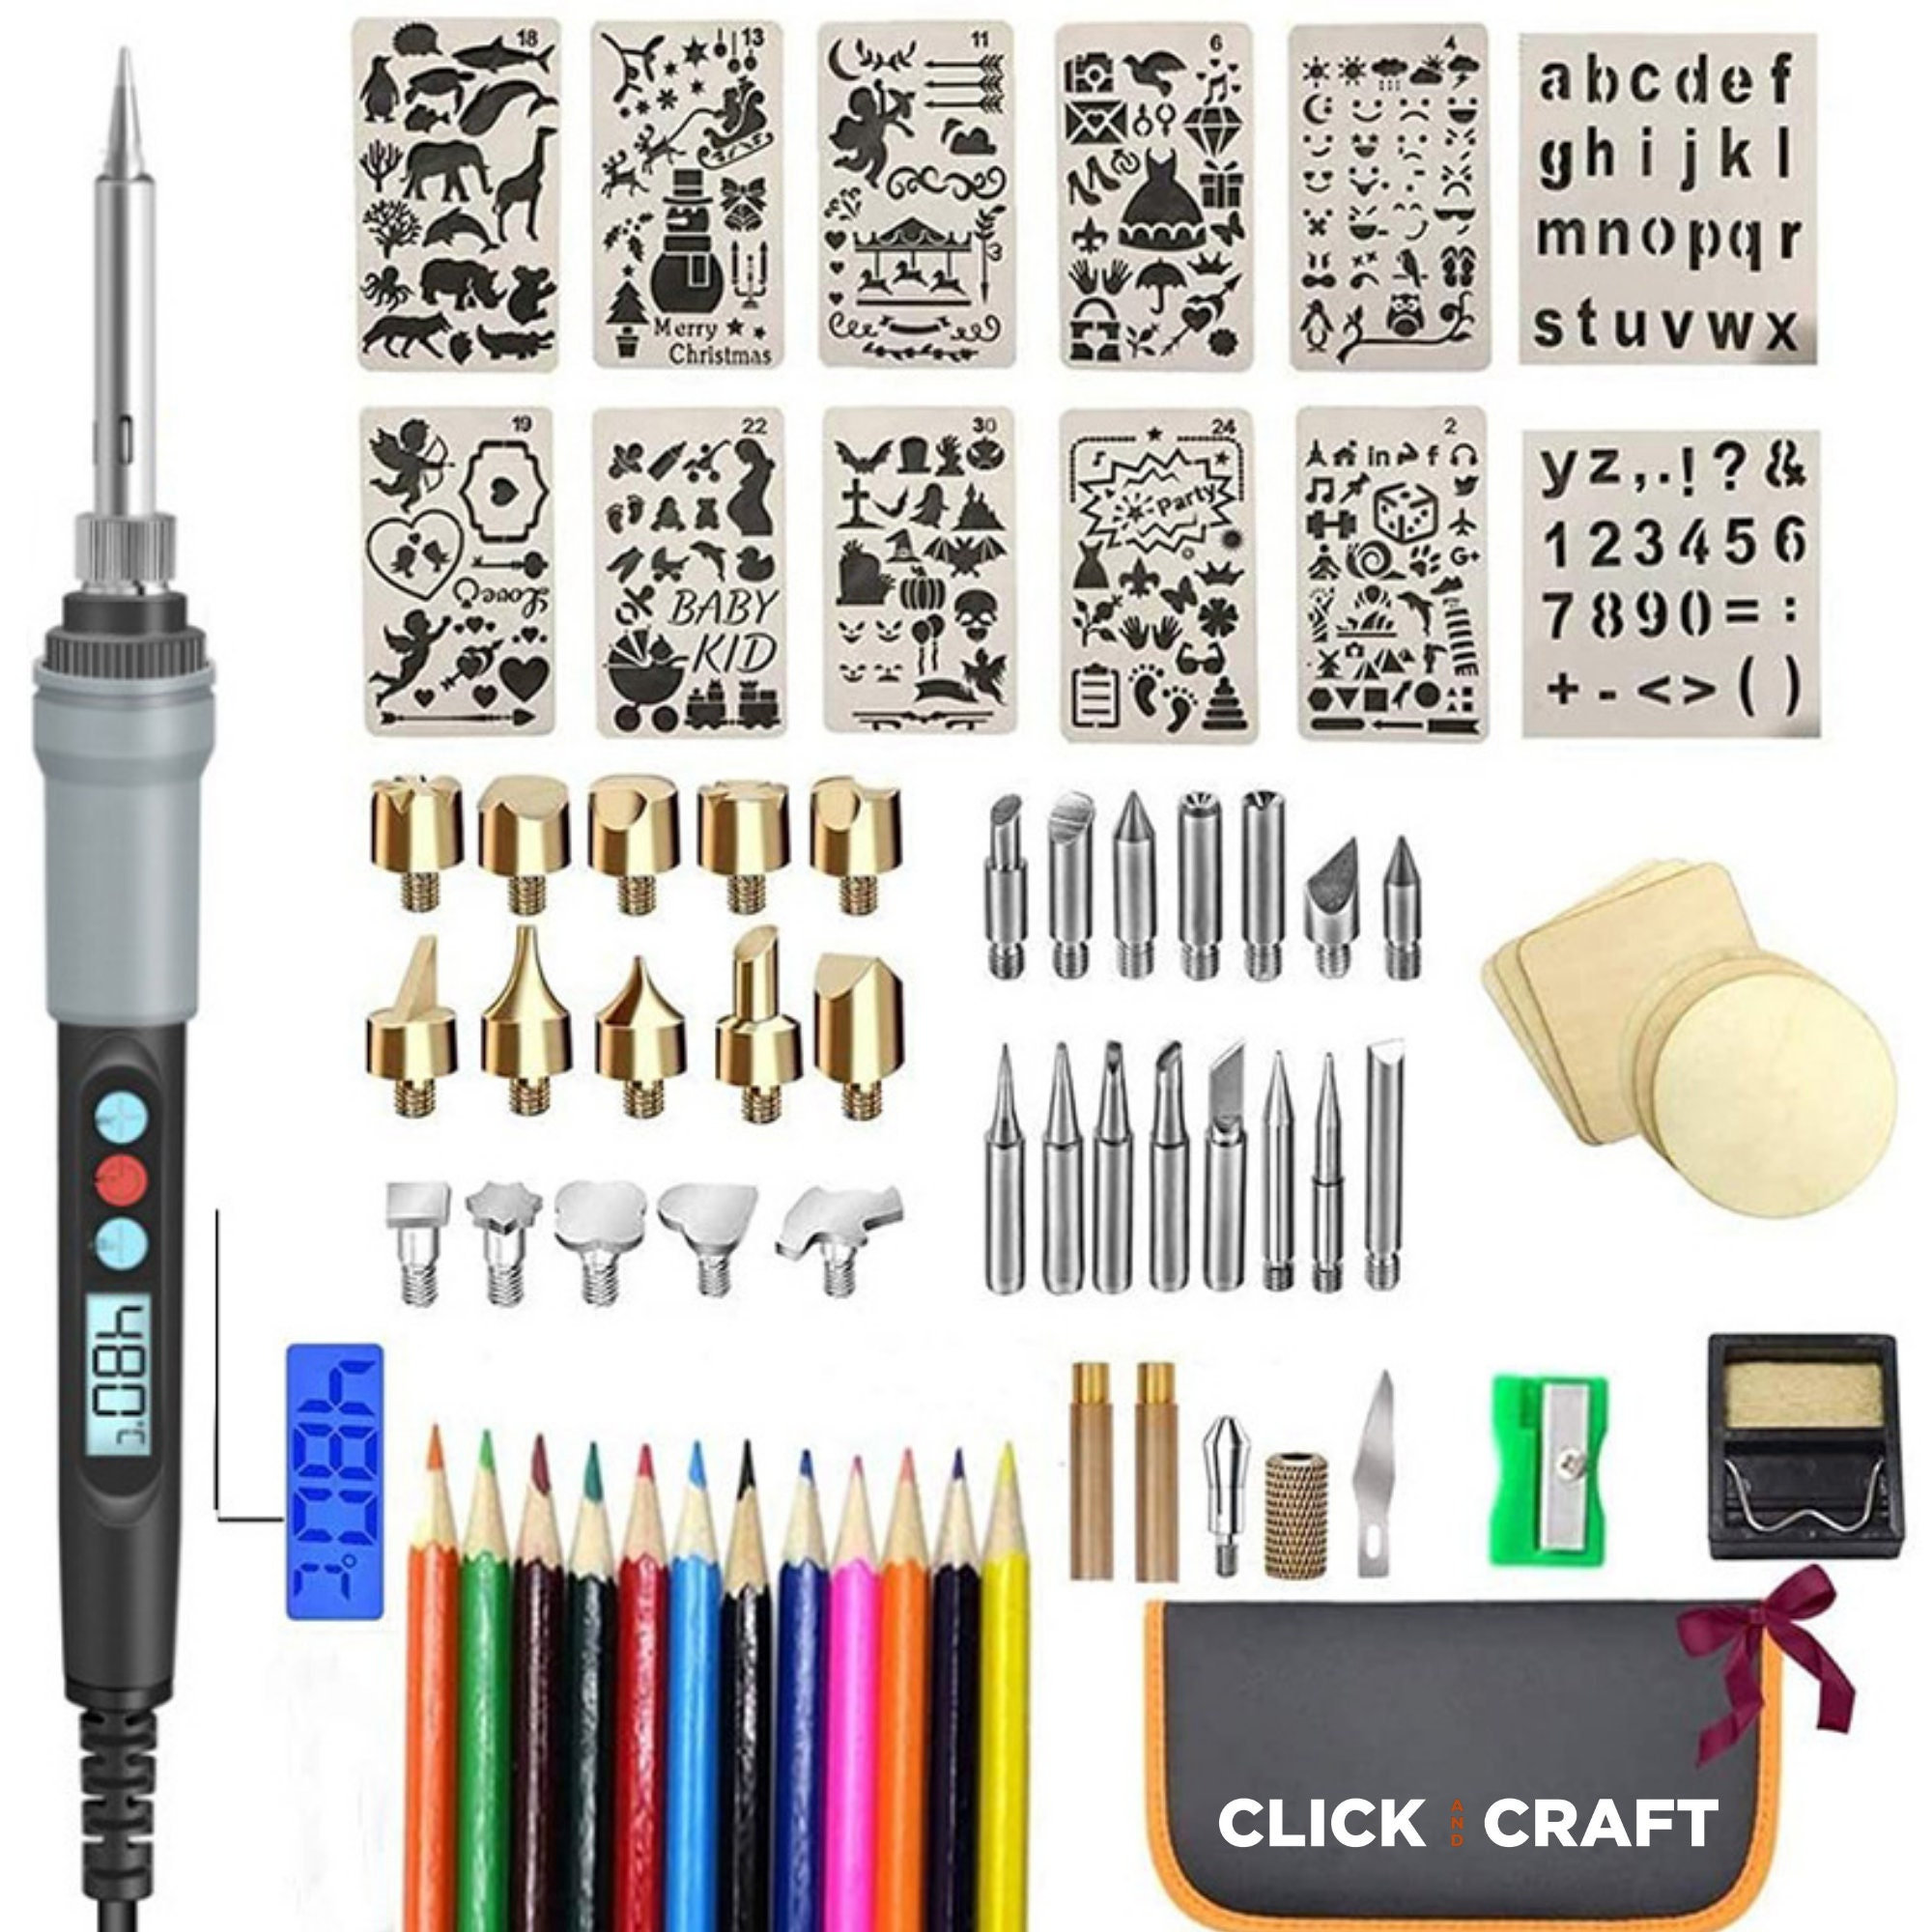 Wood Burning Tools Kit,professional Pyrography Wood Burning Kit for  Beginners Adults,110v 50W Pointer Display Pyrography 